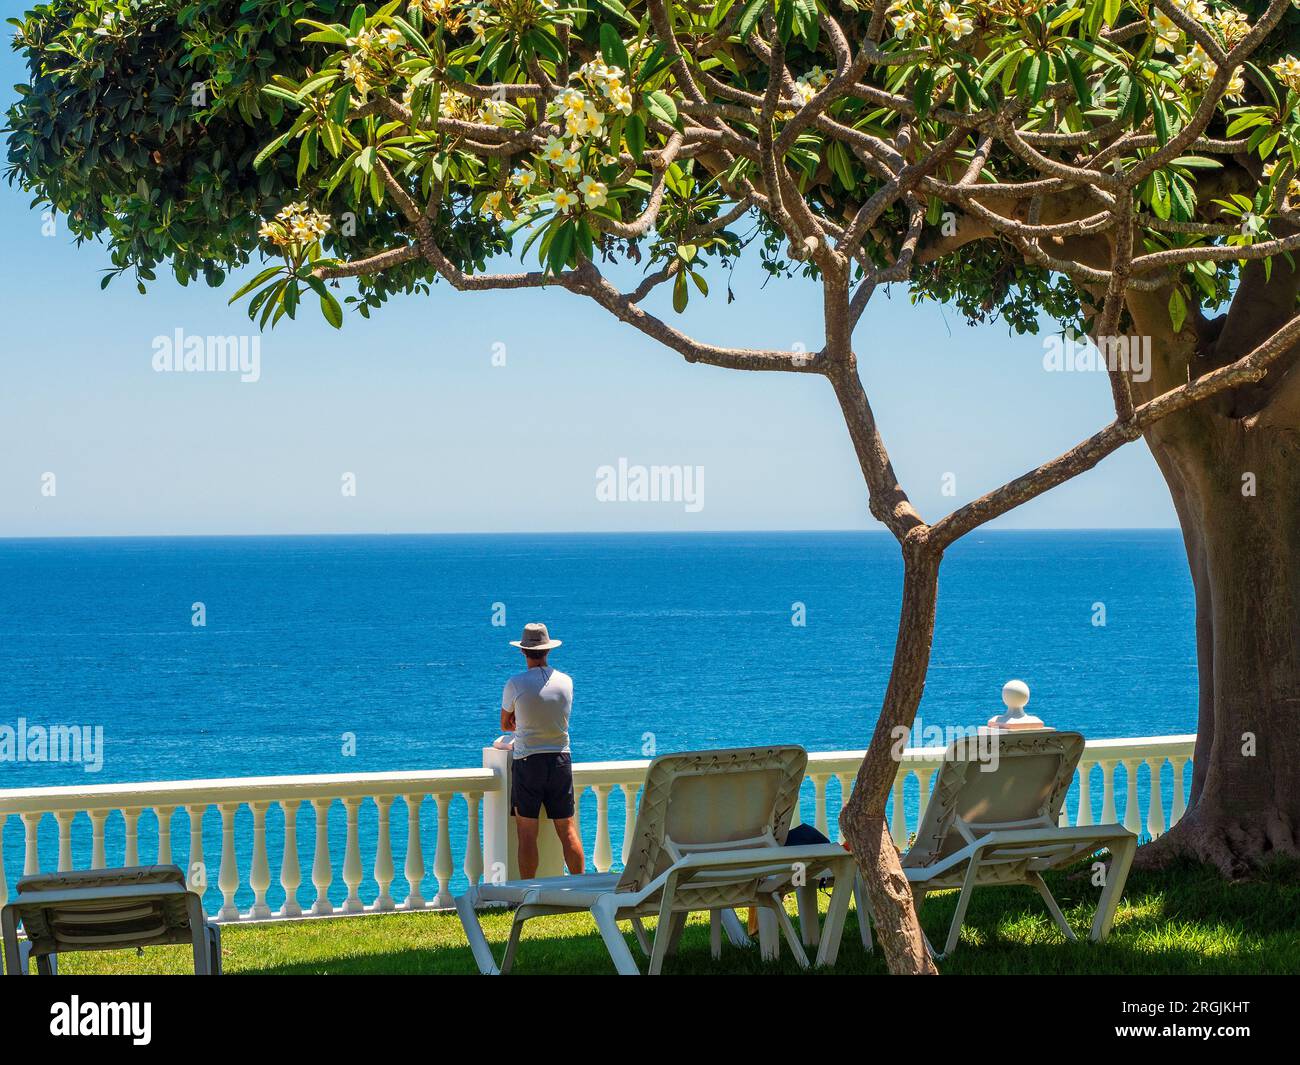 Tourist with hat enjoying the landscape of Nerja from an elevated garden. Stock Photo